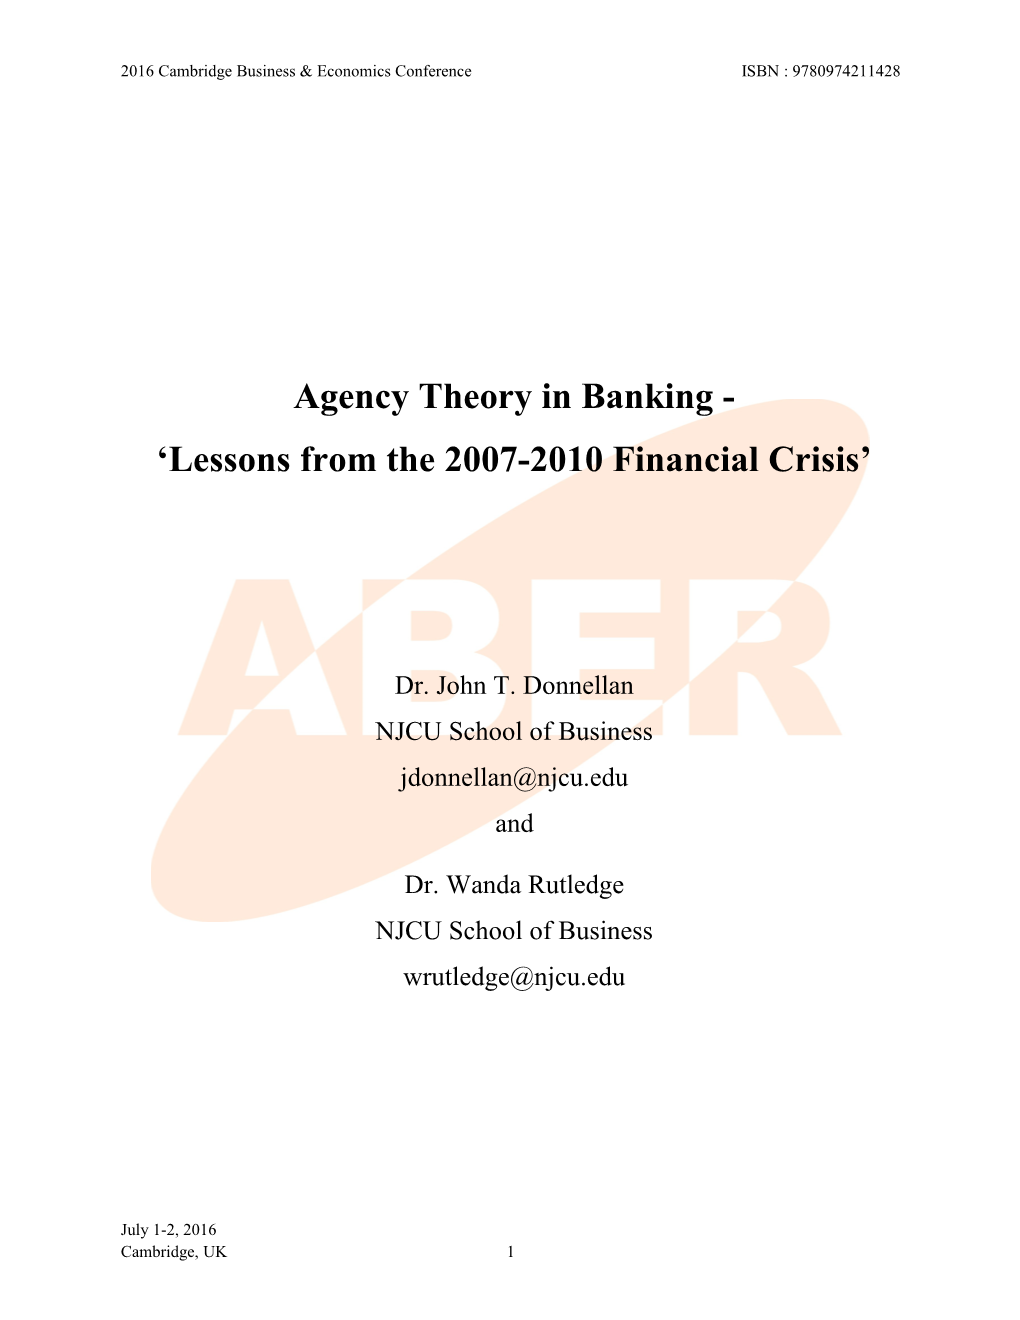 Agency Theory in Banking-Lessons from the 2007-2010 Financial Crisis